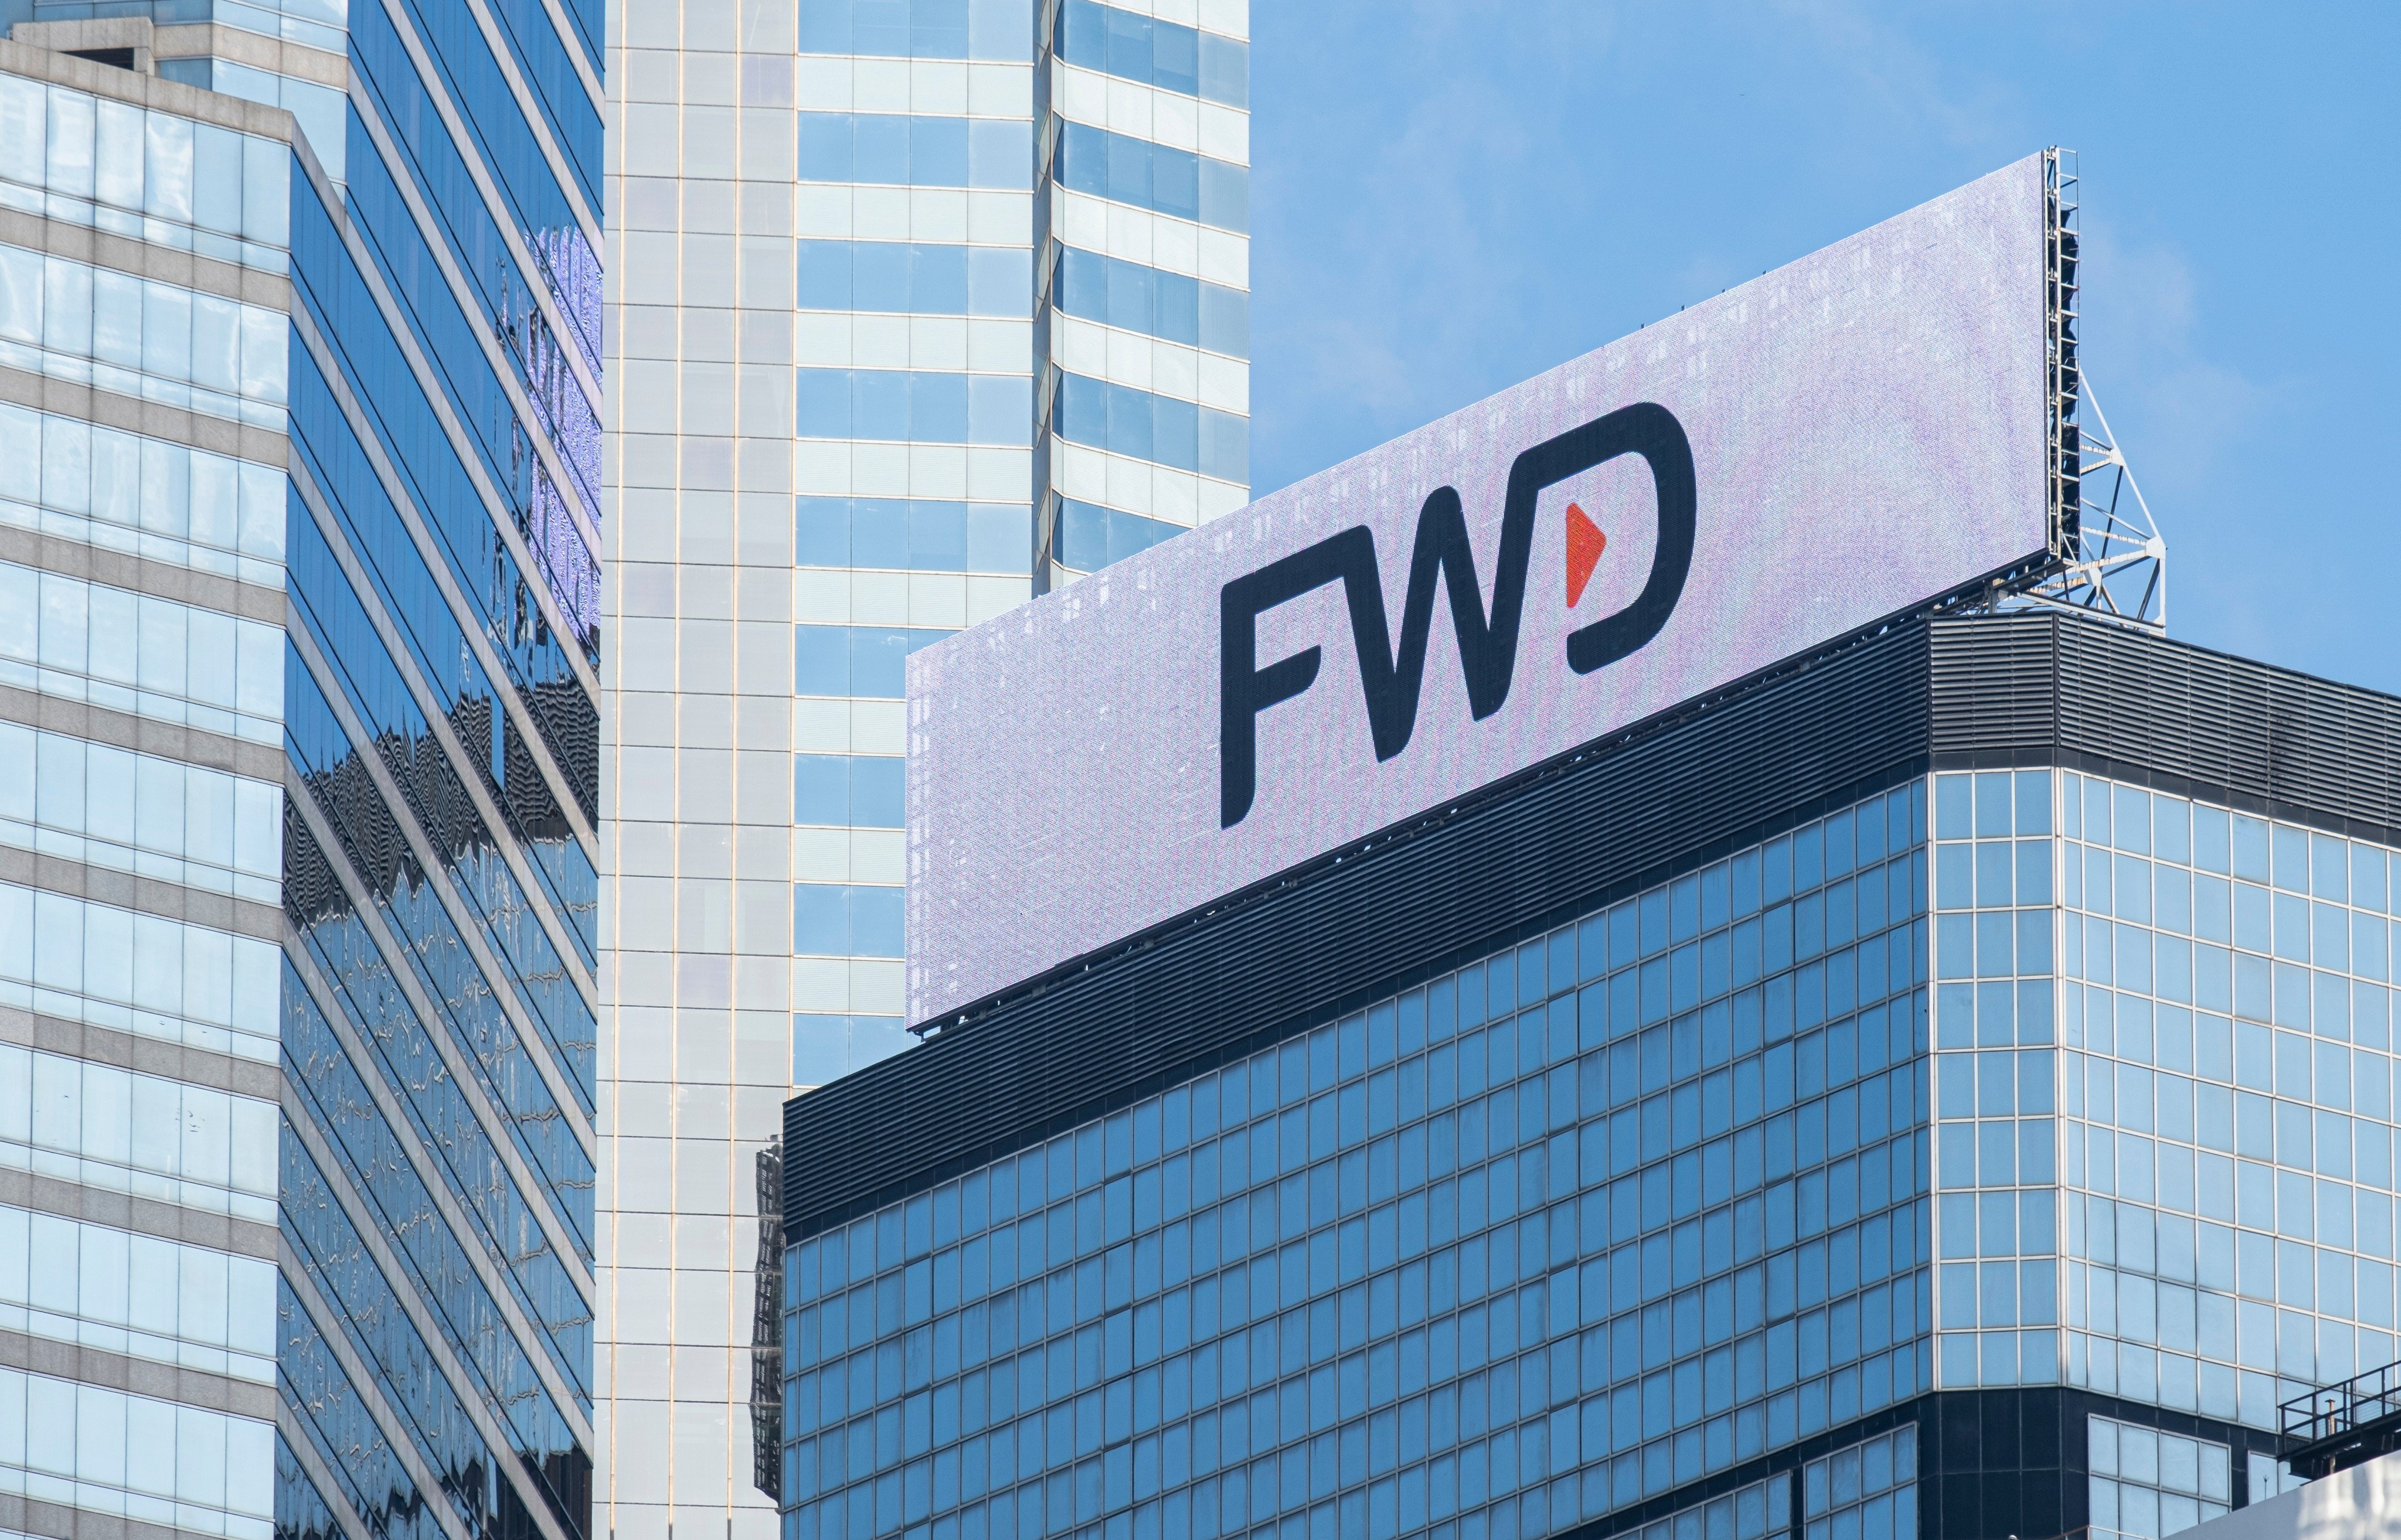 The FWD logo on a building in Hong Kong. Photo: Shutterstock Images